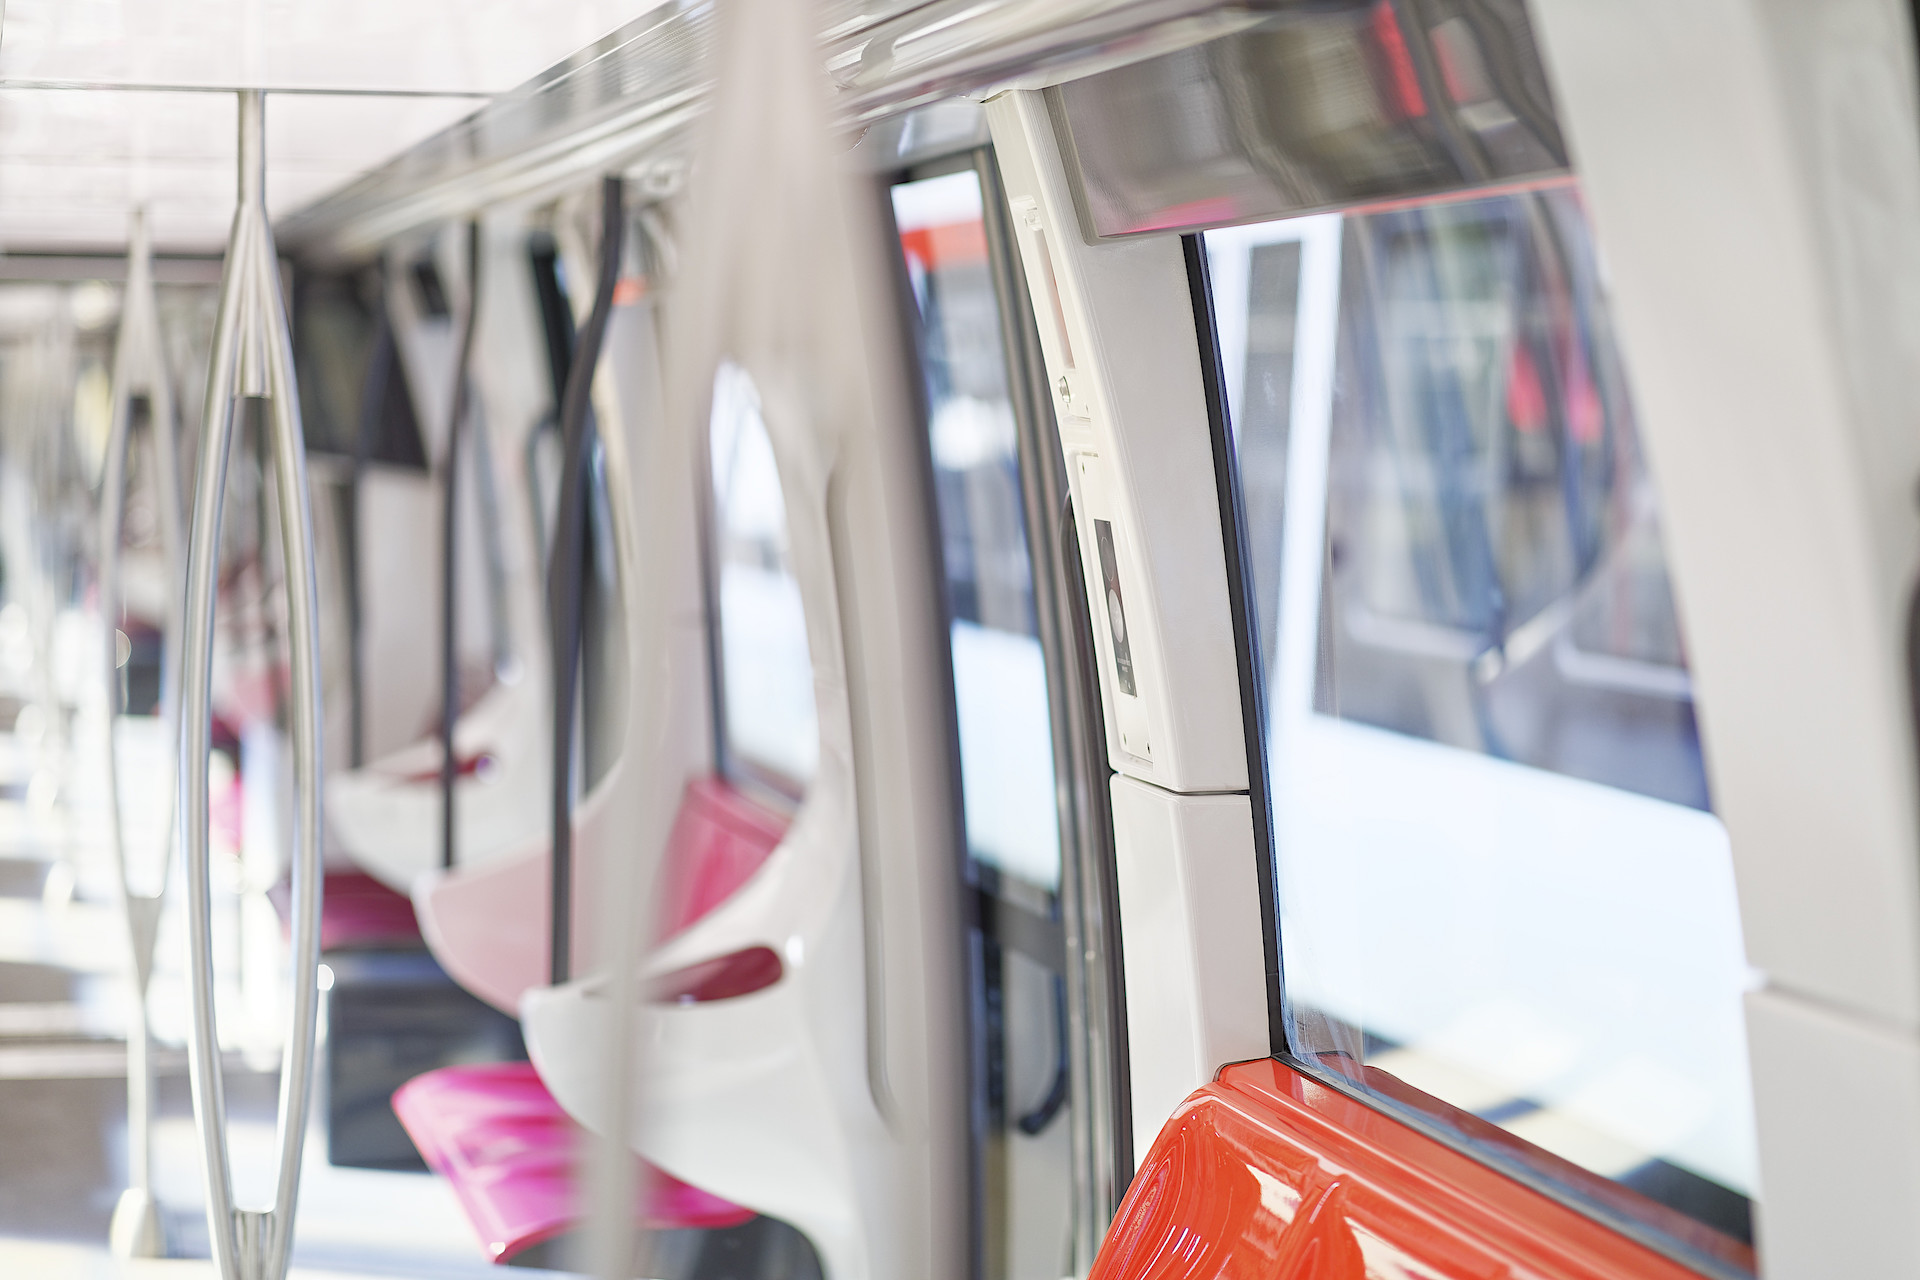 New vehicles of Métro de Lille equipped with Ruf's VisiWeb System